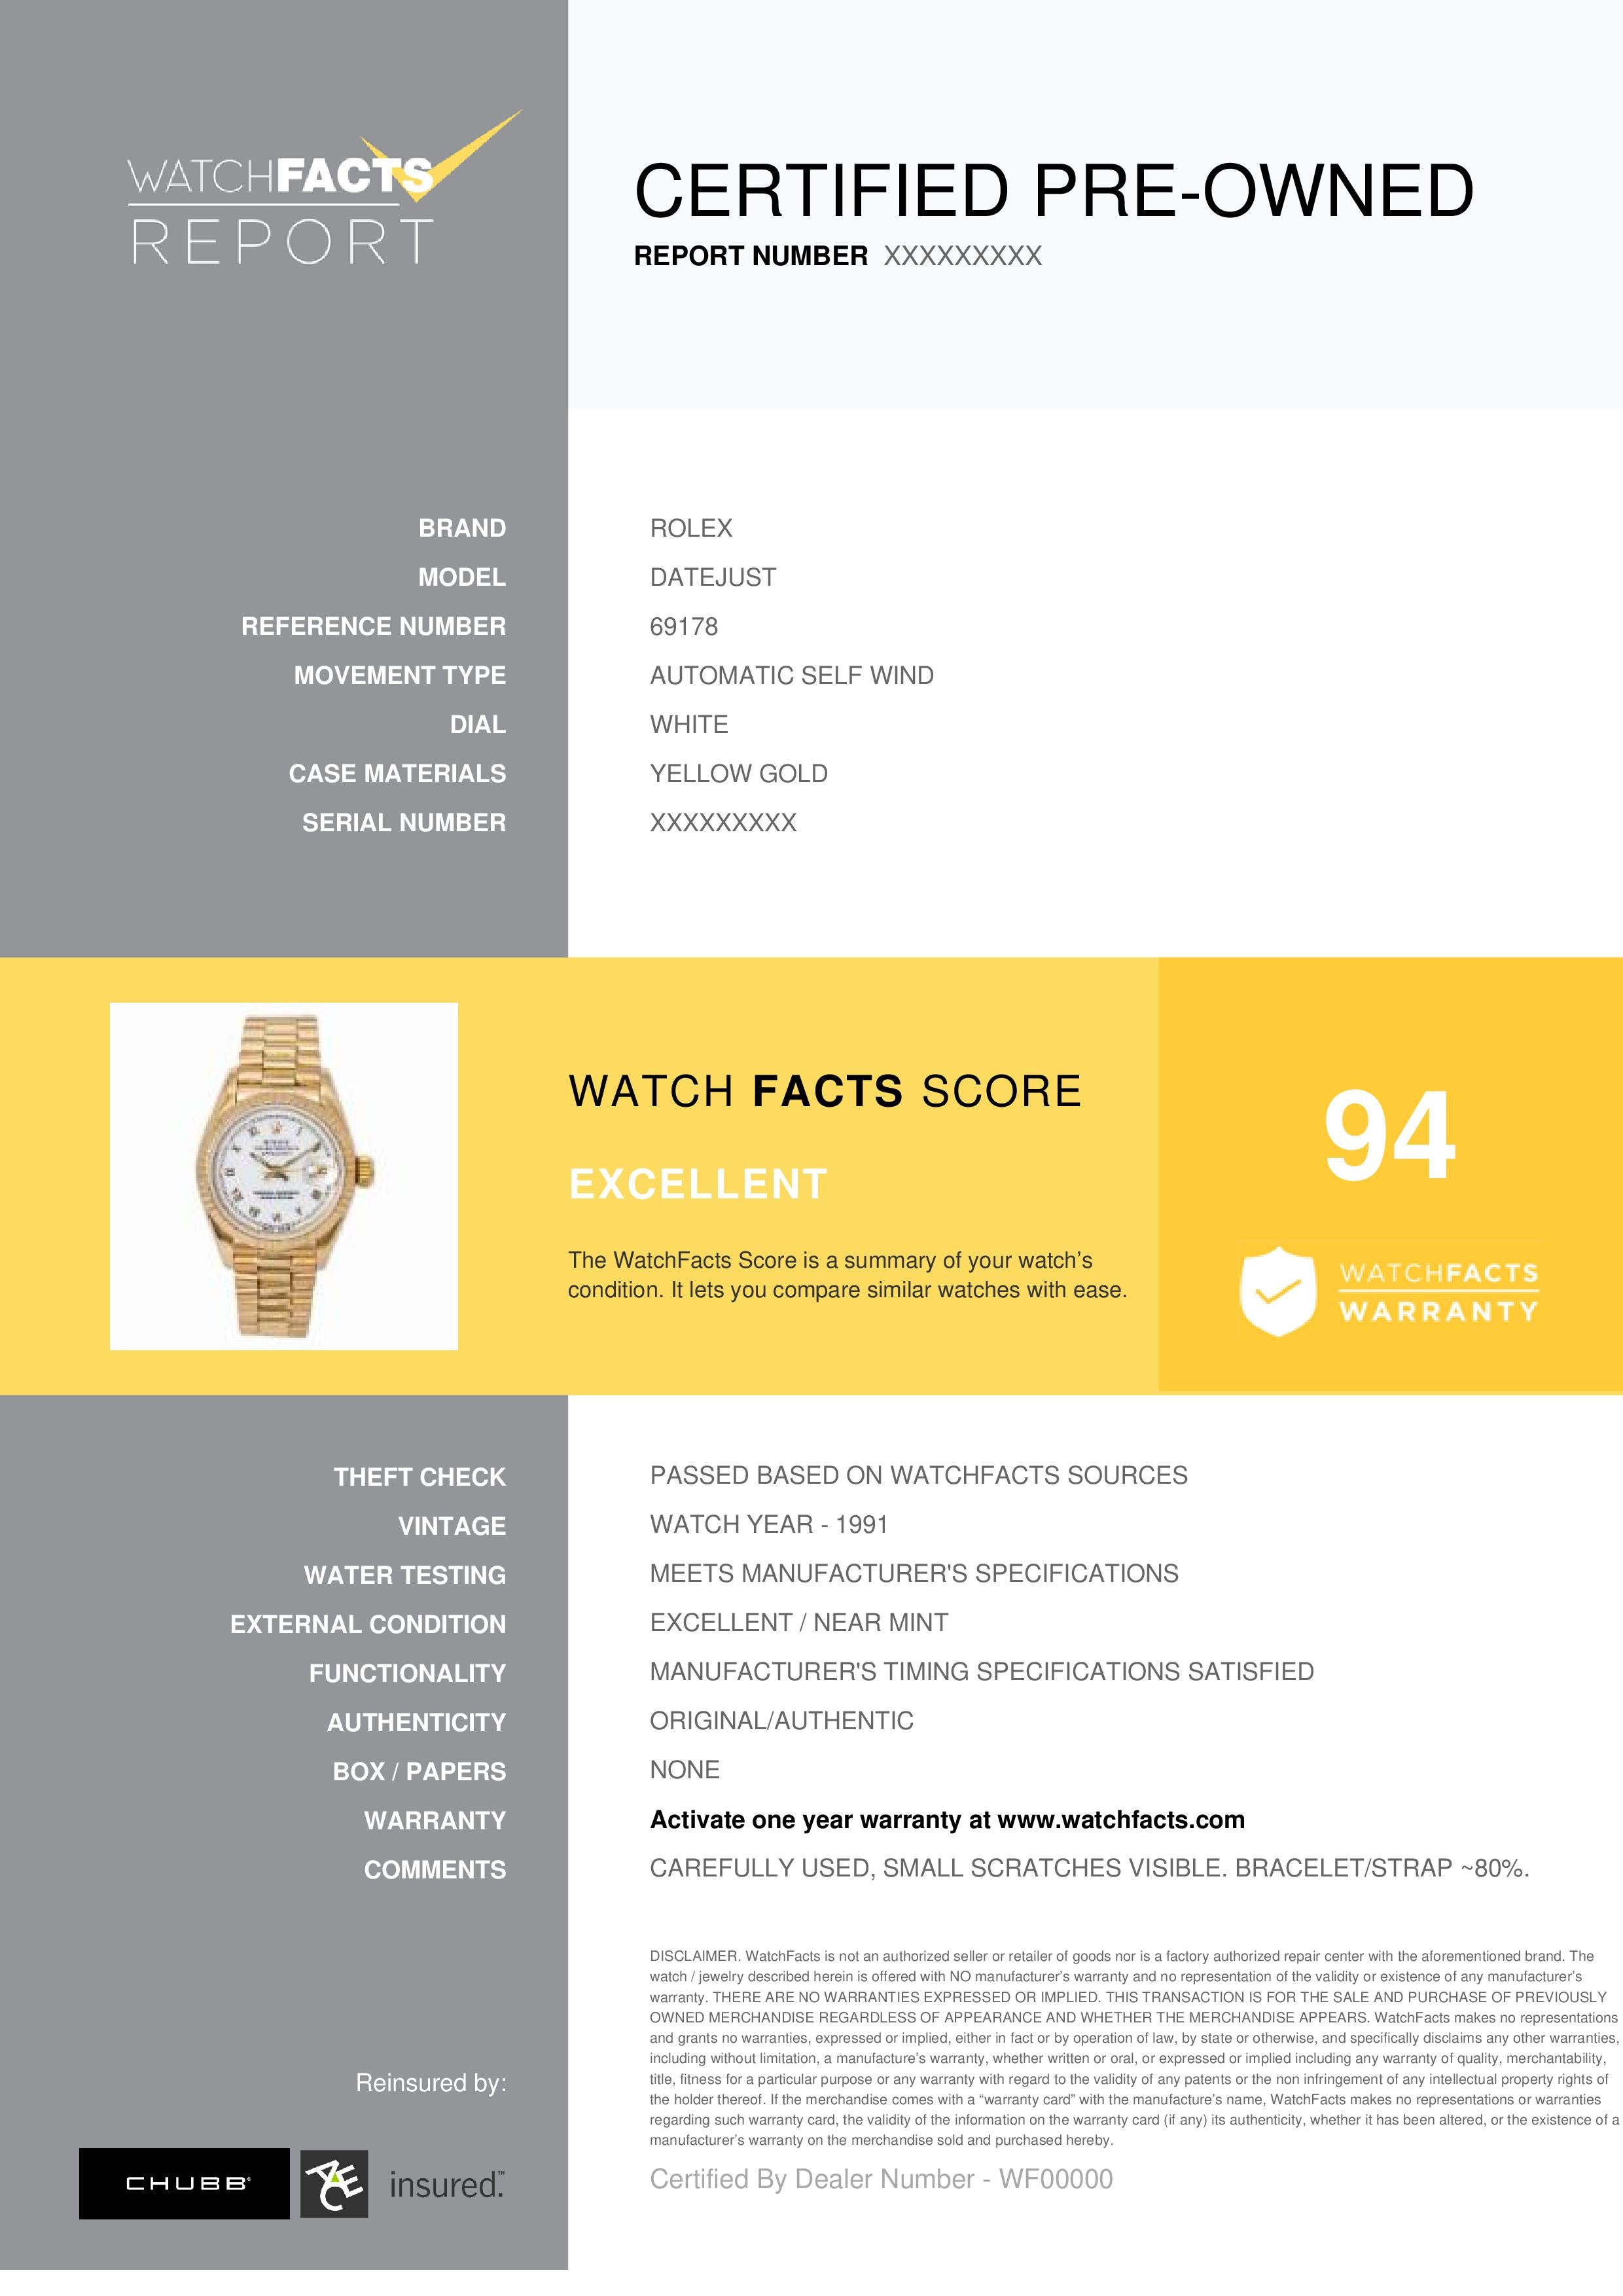 Rolex Datejust Reference #: 69178. Womens Automatic Self Wind Watch Yellow Gold White 26 MM. Verified and Certified by WatchFacts. 1 year warranty offered by WatchFacts.
